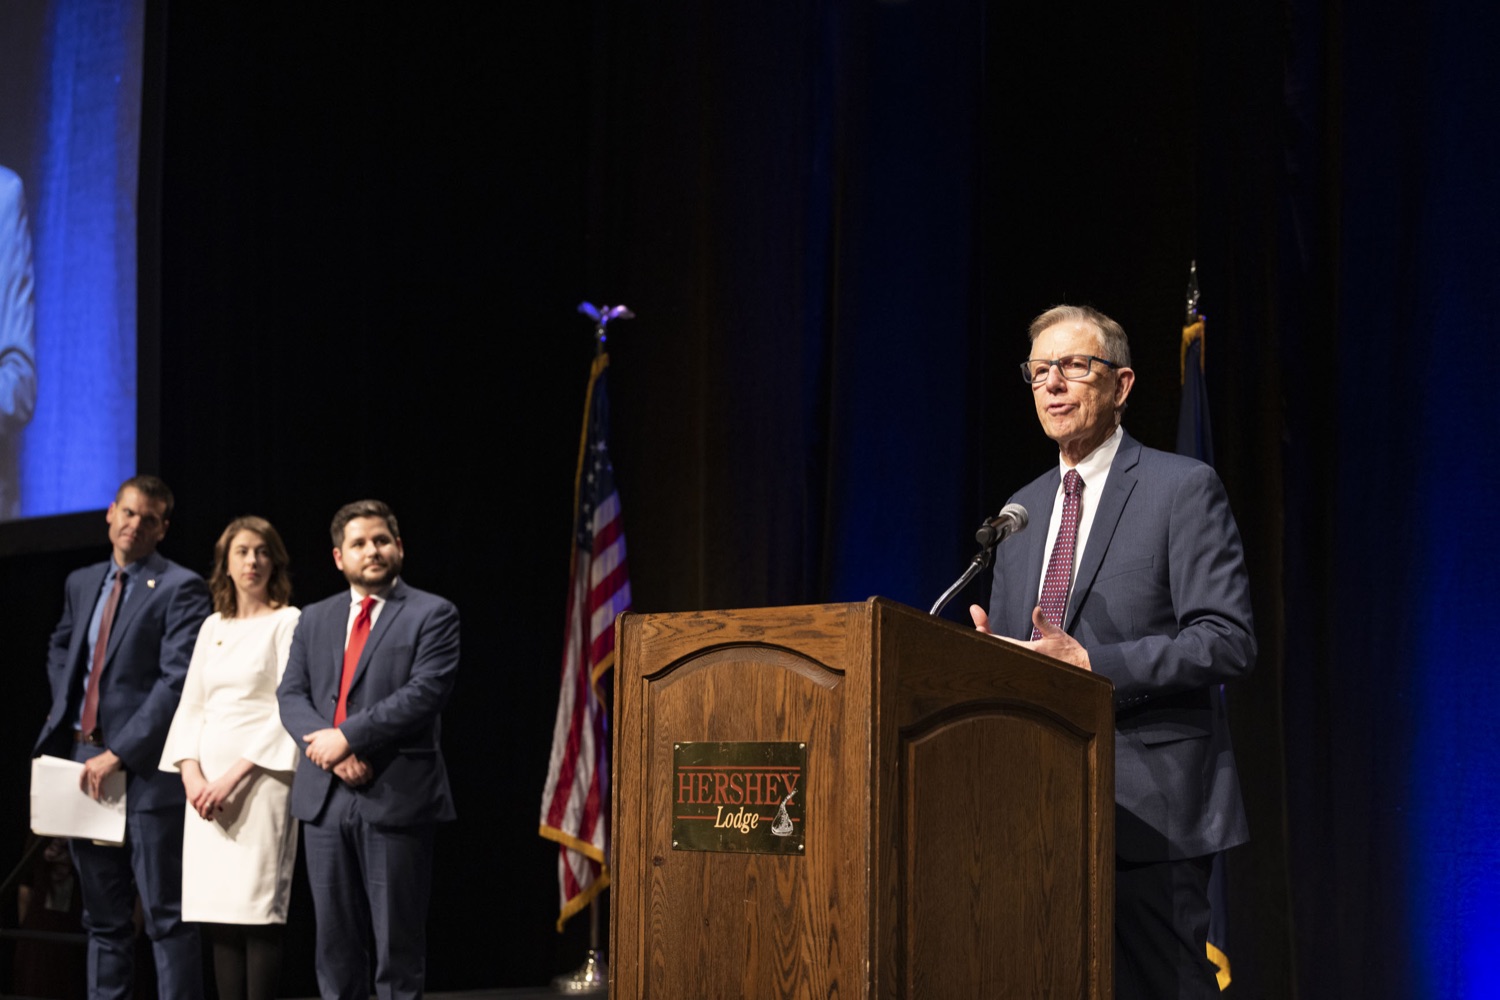 PDE Special Assistant to the Acting Secretary David Volkman makes opening remarks at the 2023 Pennsylvania Teacher of the Year awards, in Hershey, PA on December 5, 2022.<br><a href="https://filesource.amperwave.net/commonwealthofpa/photo/22364_pde_teacherOfTheYear_03.jpg" target="_blank">⇣ Download Photo</a>